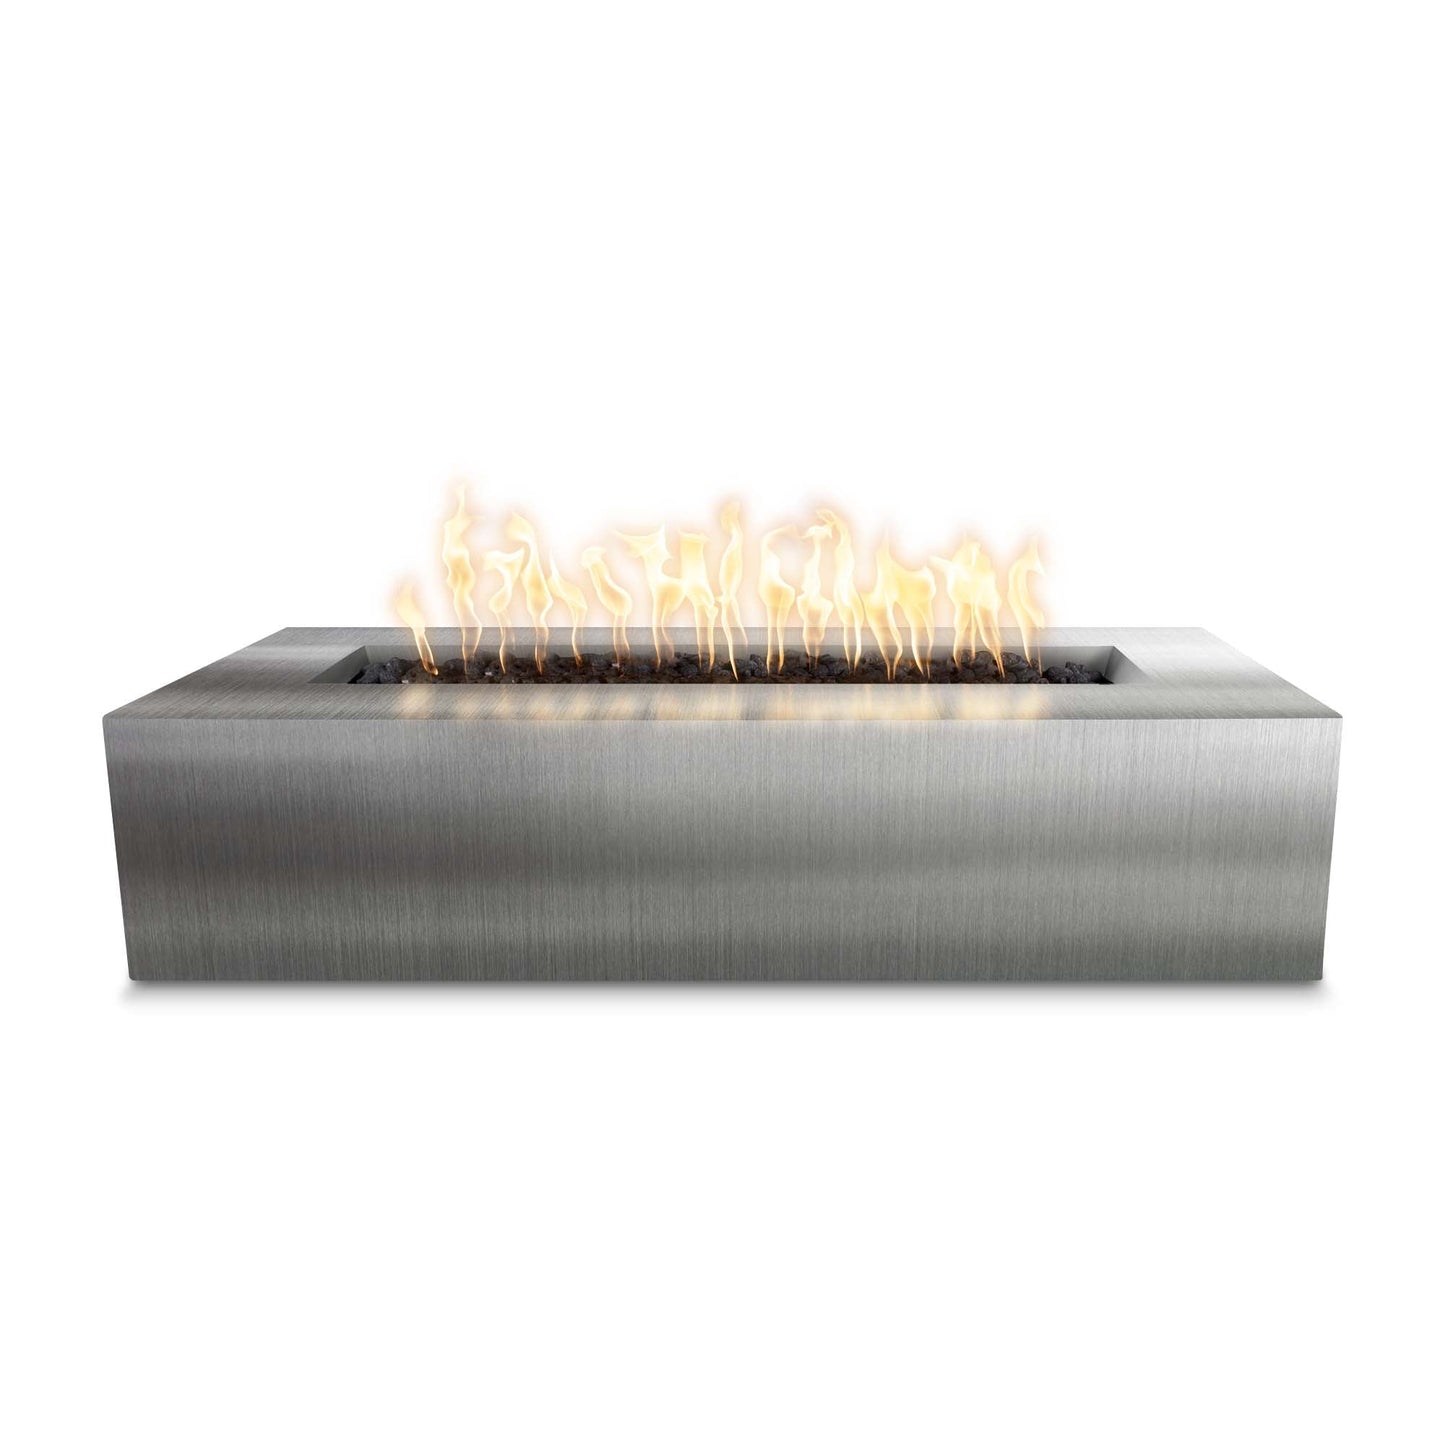 The Outdoor Plus Rectangular Regal 48" Corten Steel Liquid Propane Fire Pit with Flame Sense with Spark Ignition